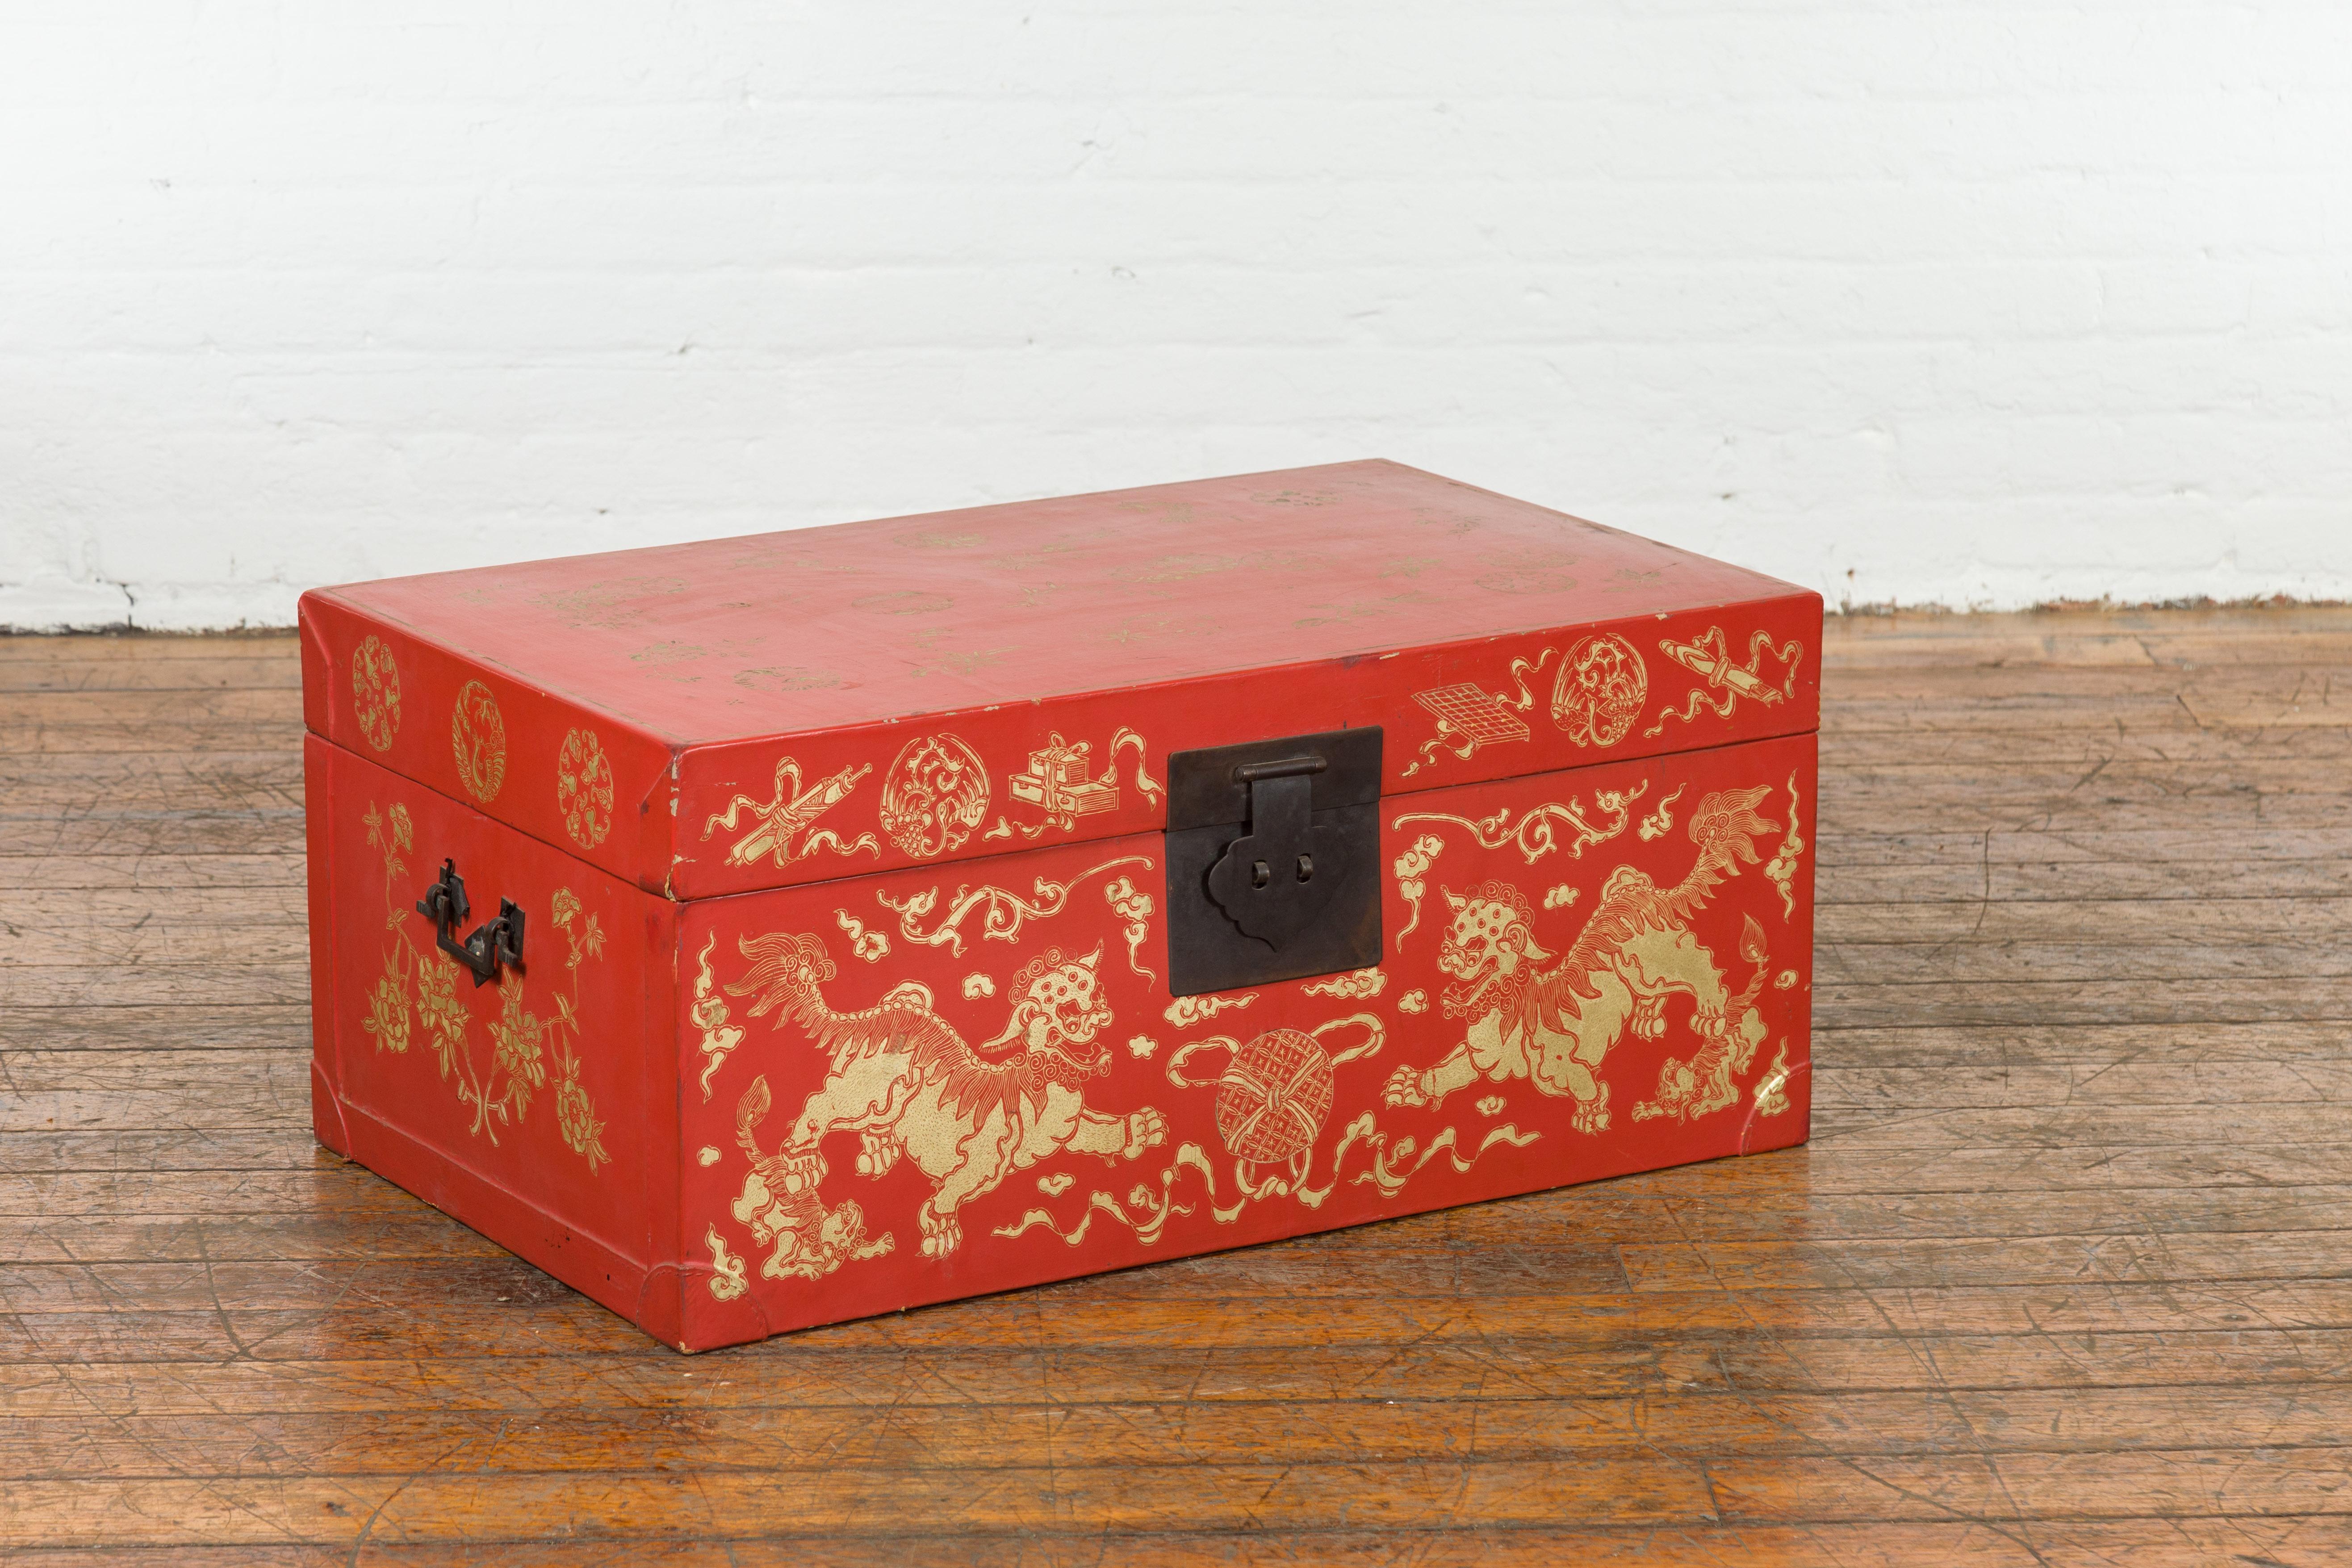 A Chinese red lacquered blanket chest from the 20th century, with gilt décor depicting guardian lions, flowers, scrolling clouds and scholar objects, as well as yellow fabric lining and iron hardware. Created in China during the 20th century, this